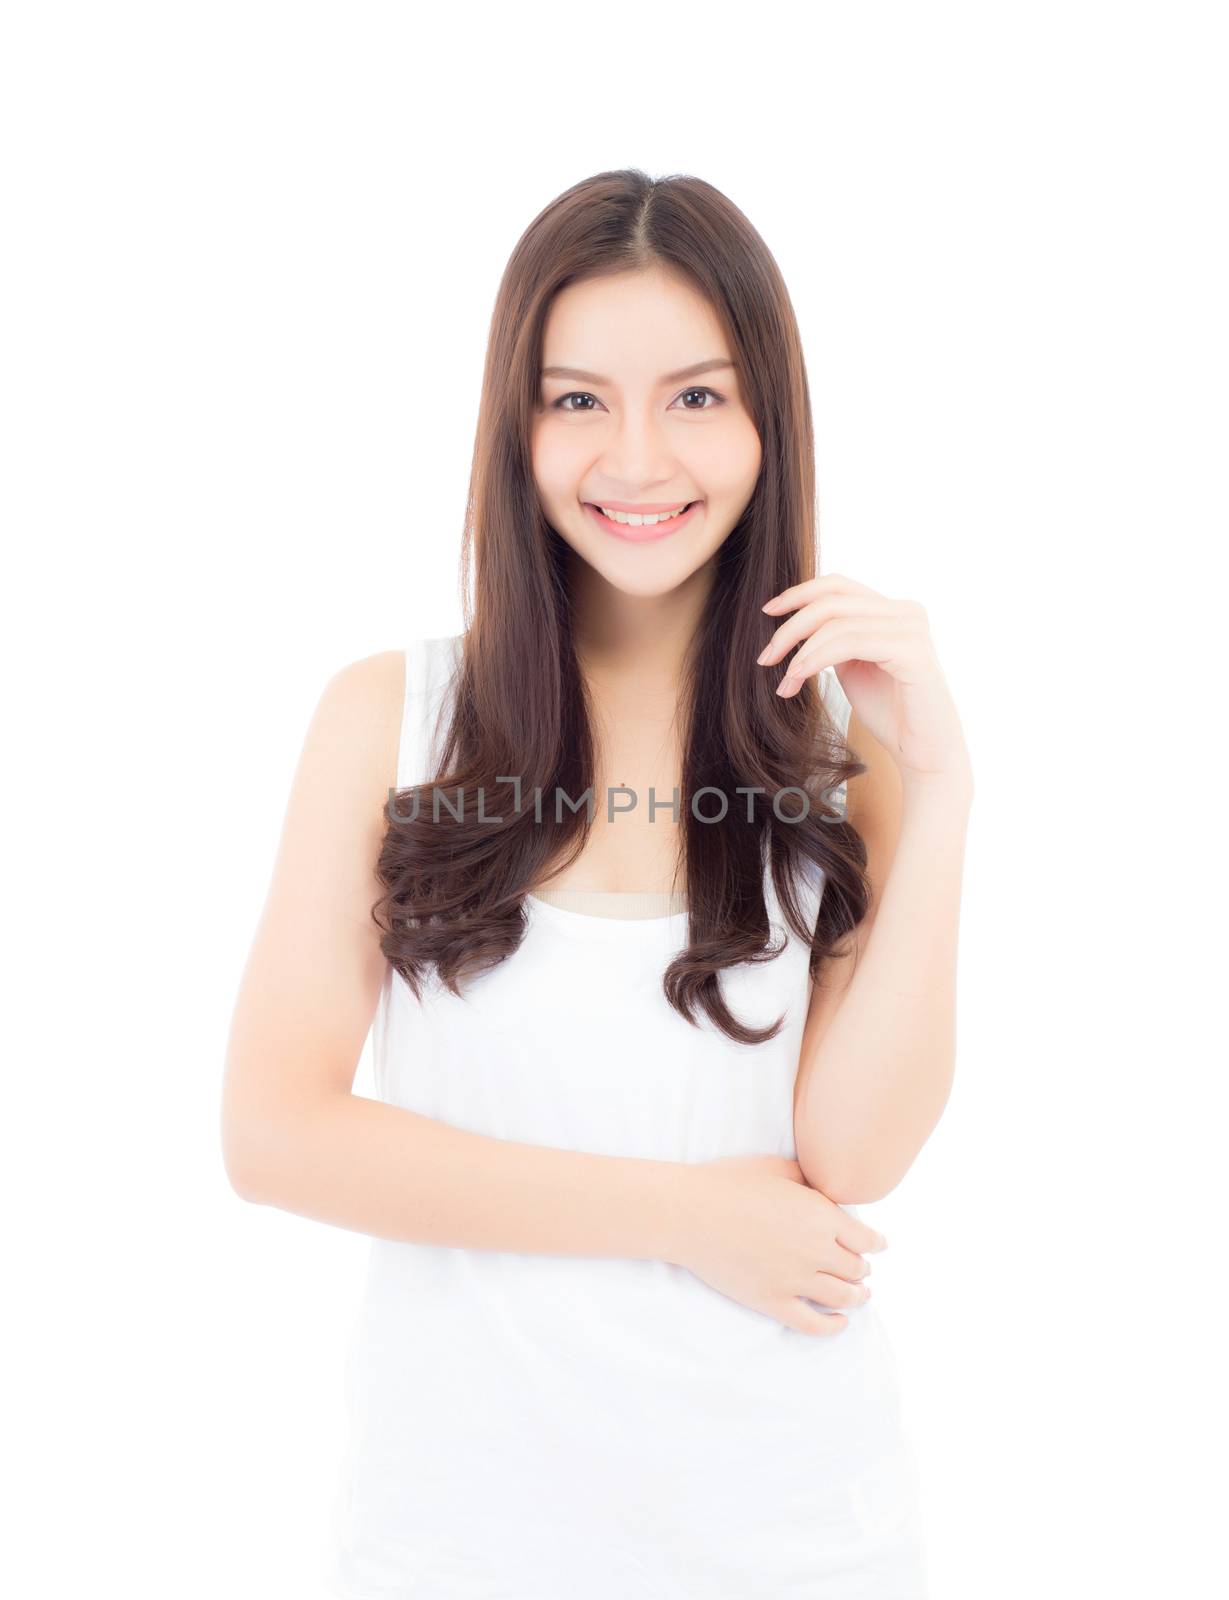 Portrait of beautiful asian woman makeup of cosmetic, beauty of girl with face smile attractive isolated on white background, perfect with wellness and healthcare concept.